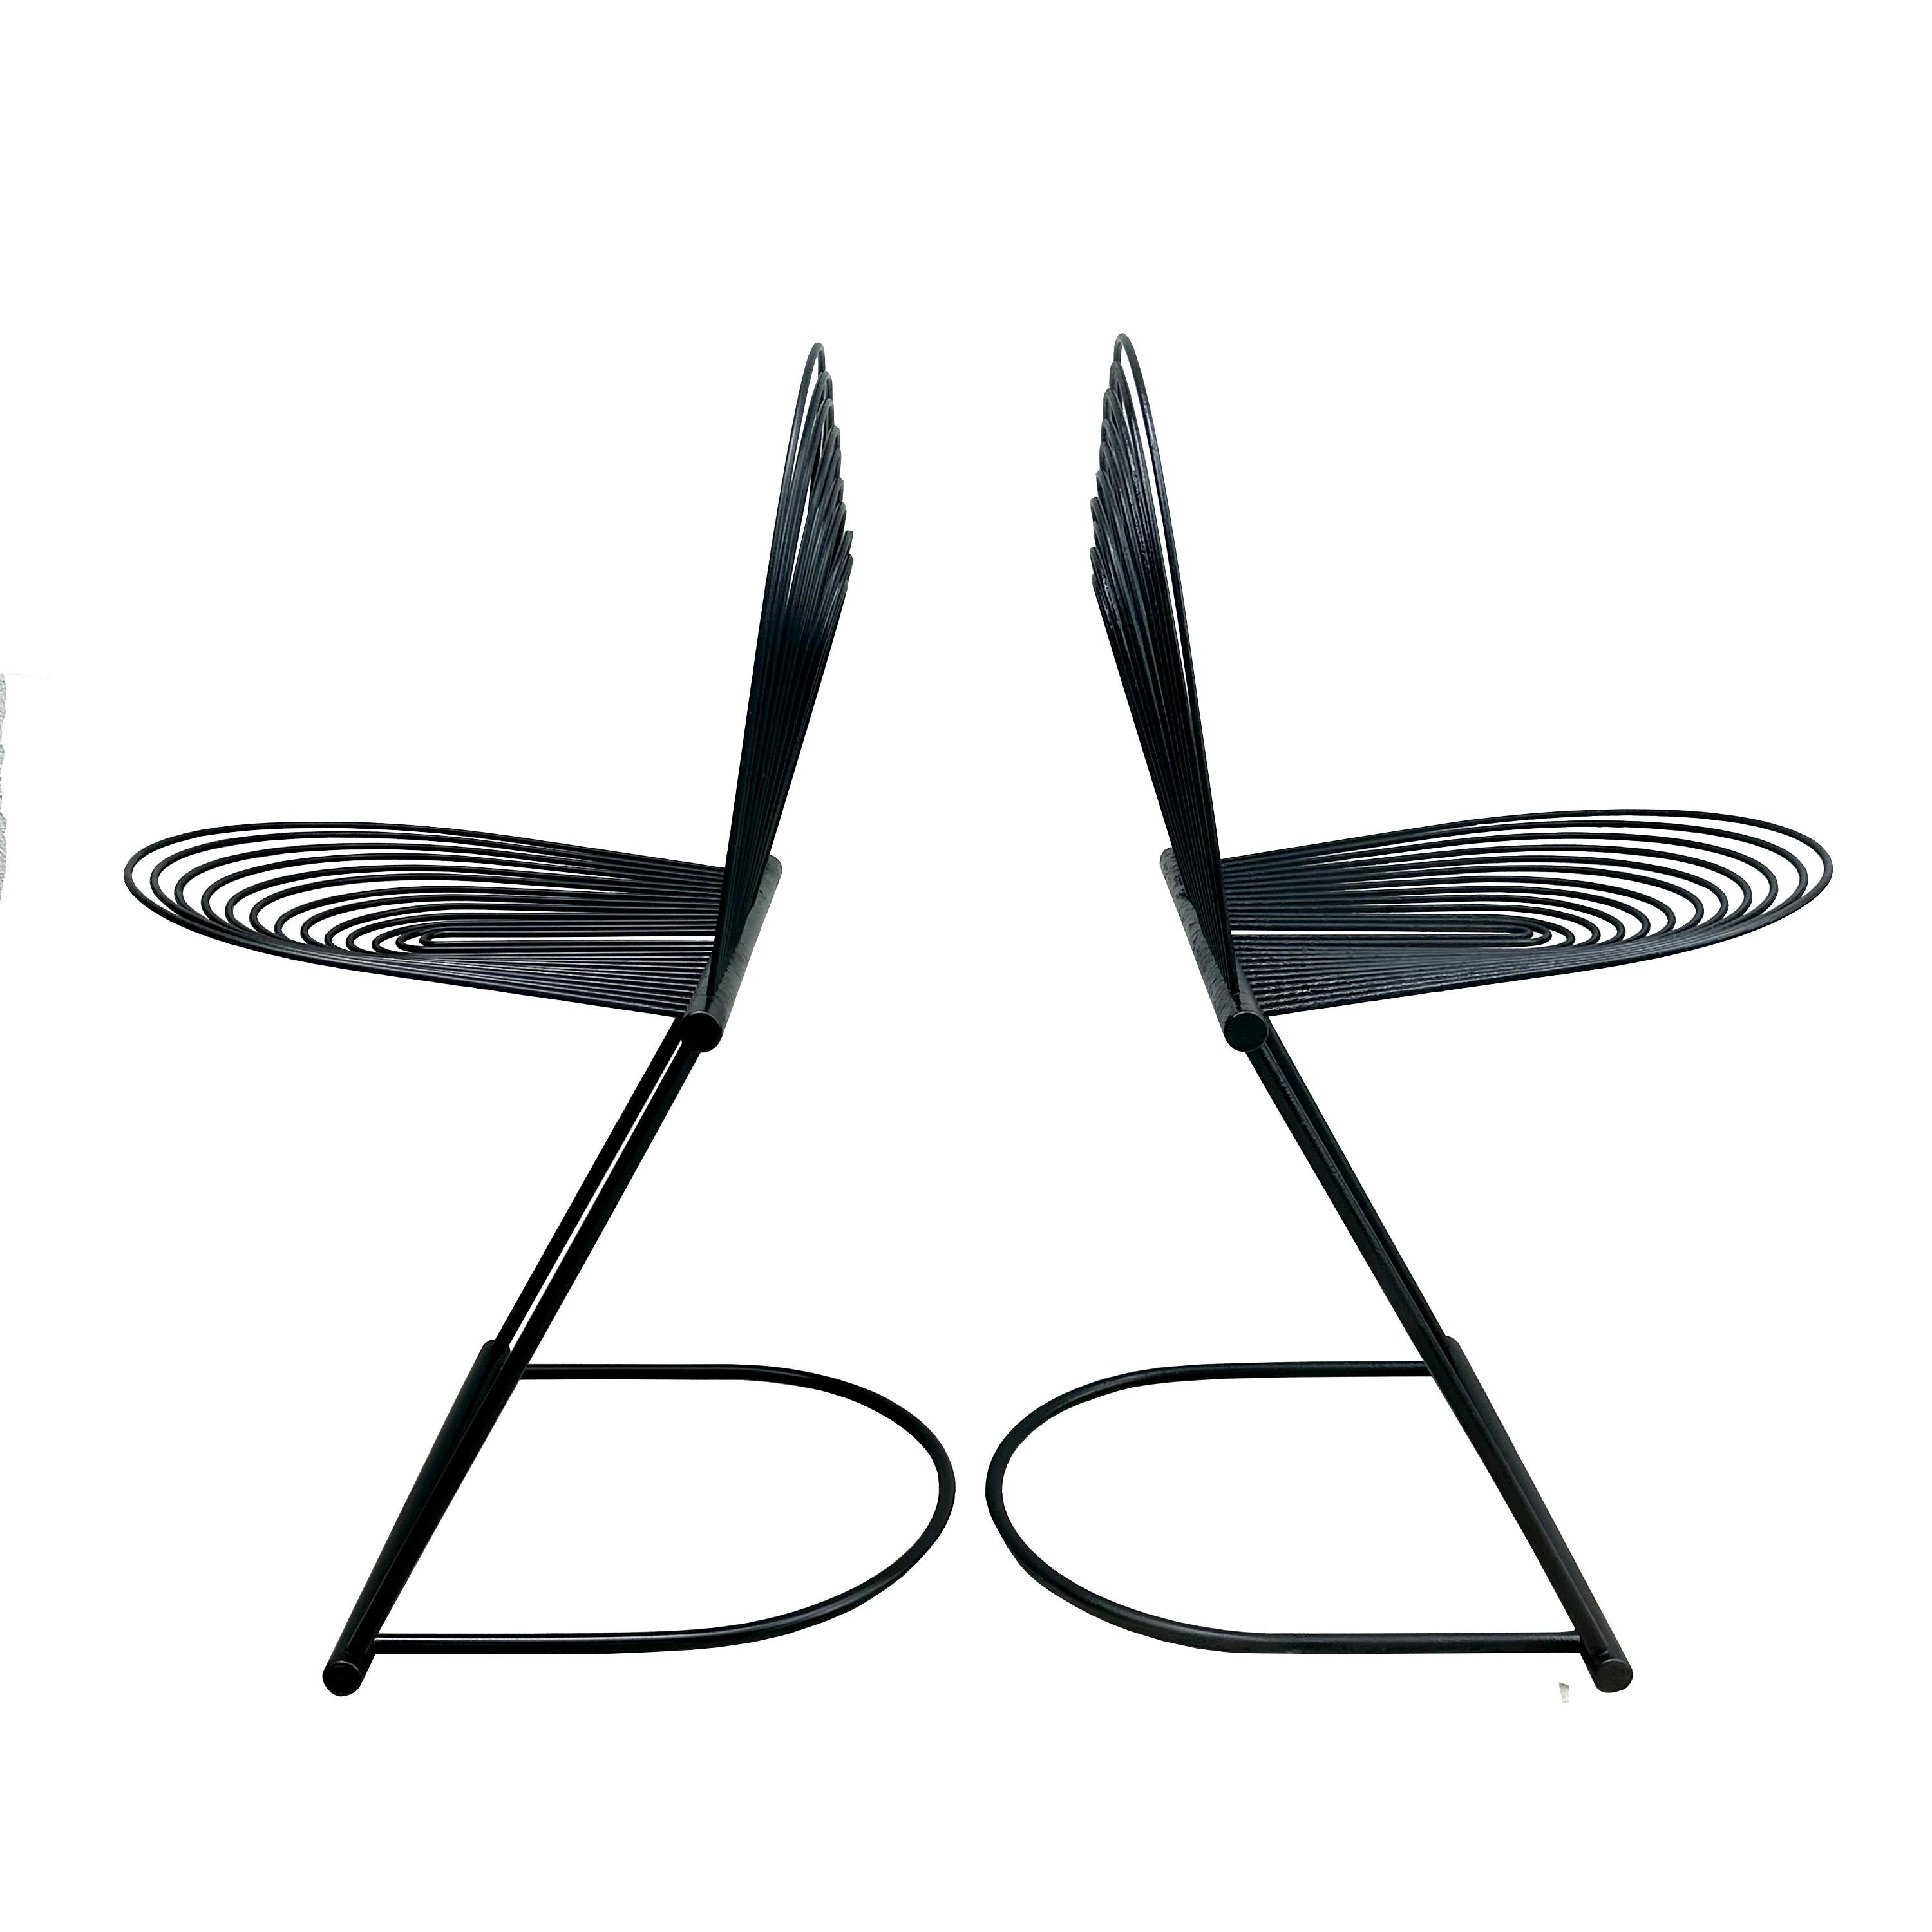 Rare set of 4 1980s Post-Modern Cantilever Swing Chairs.  Designed in 1982 by Herbert and Jutta Ohl for German Manufacturer Rosenthal Studio Linie.  Seat and backrests are made of spring steel attached to aluminum frame.